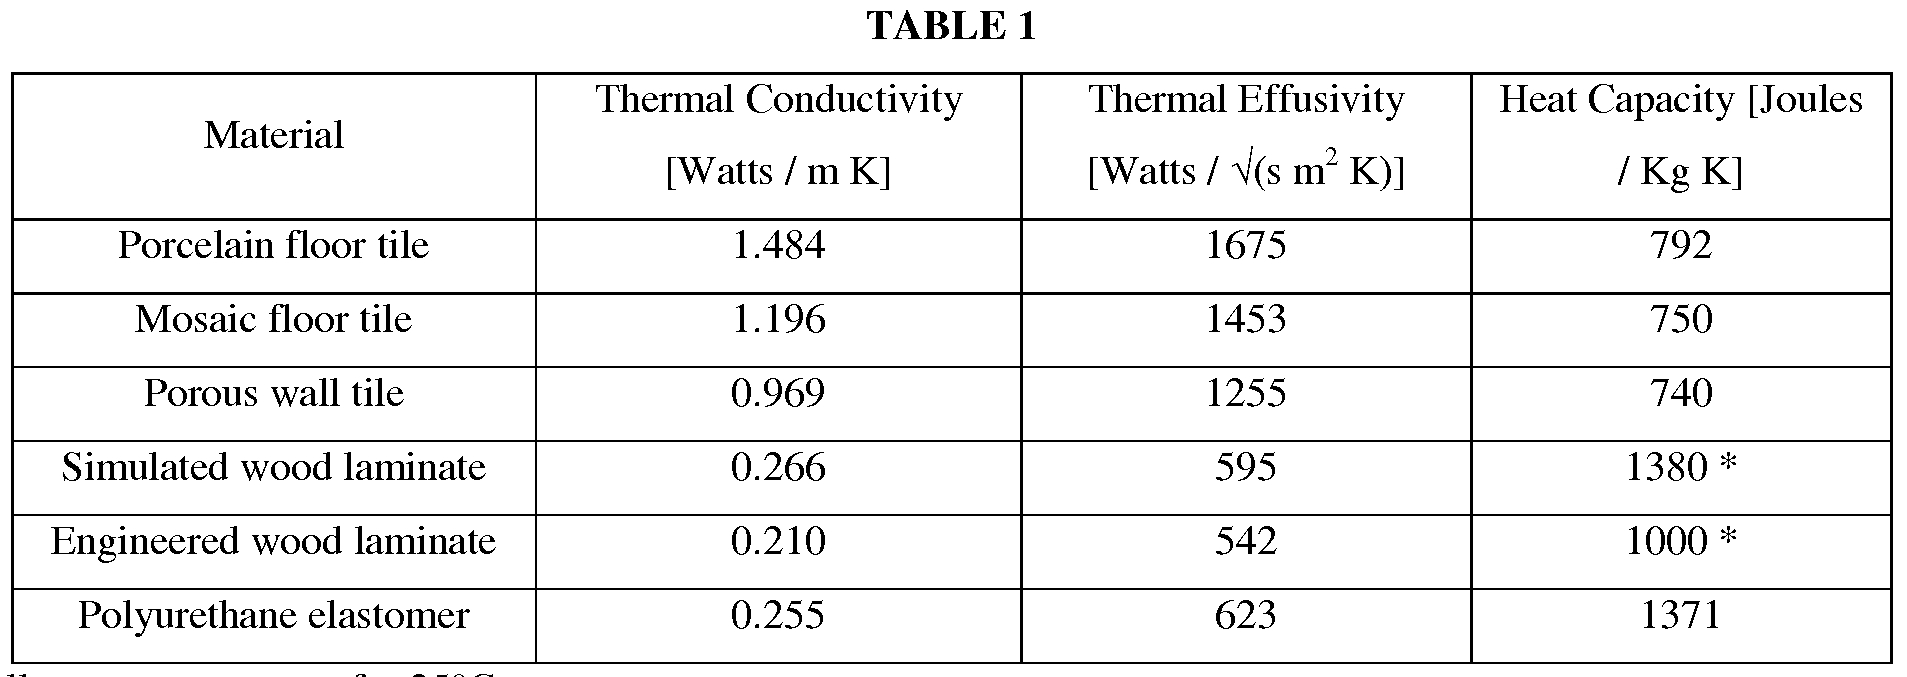 Thermal Resistance Of Ceiling Tiles Thermal Resistance Of Ceiling Tiles patente wo2010132452a2 tile systems with enhanced thermal 1907 X 677